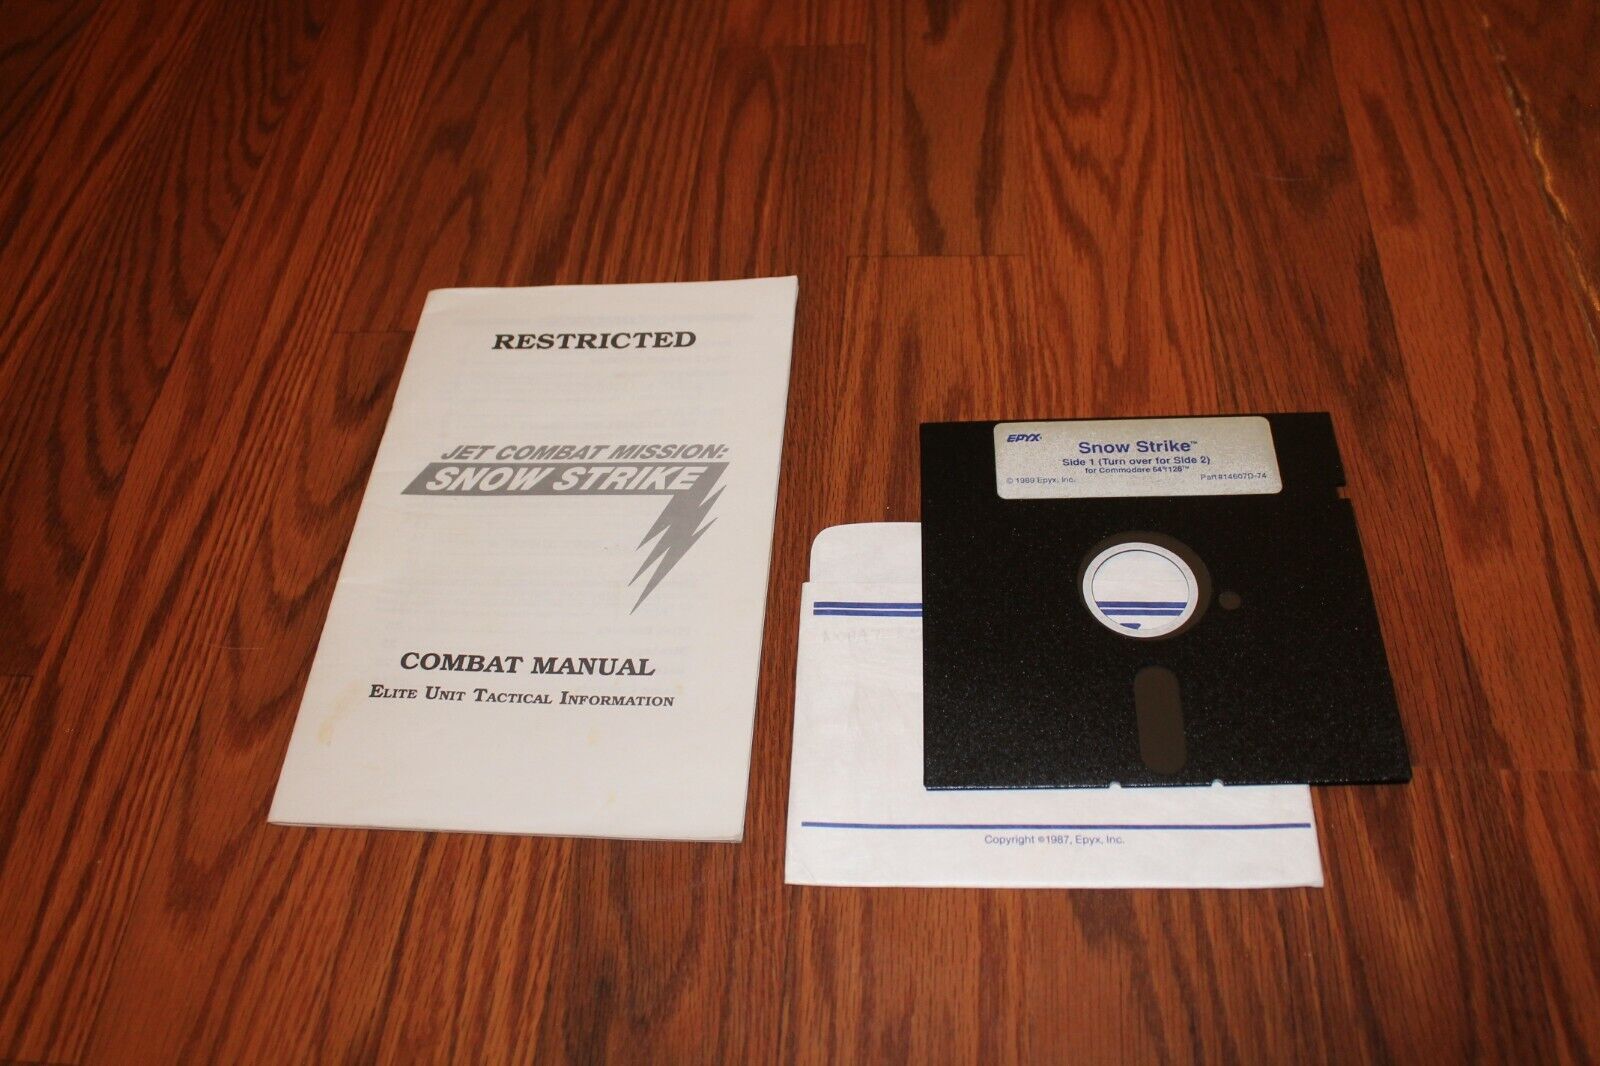 Jet Combat Mission: Snow Strike Commodore 64 Game with manual - Tested